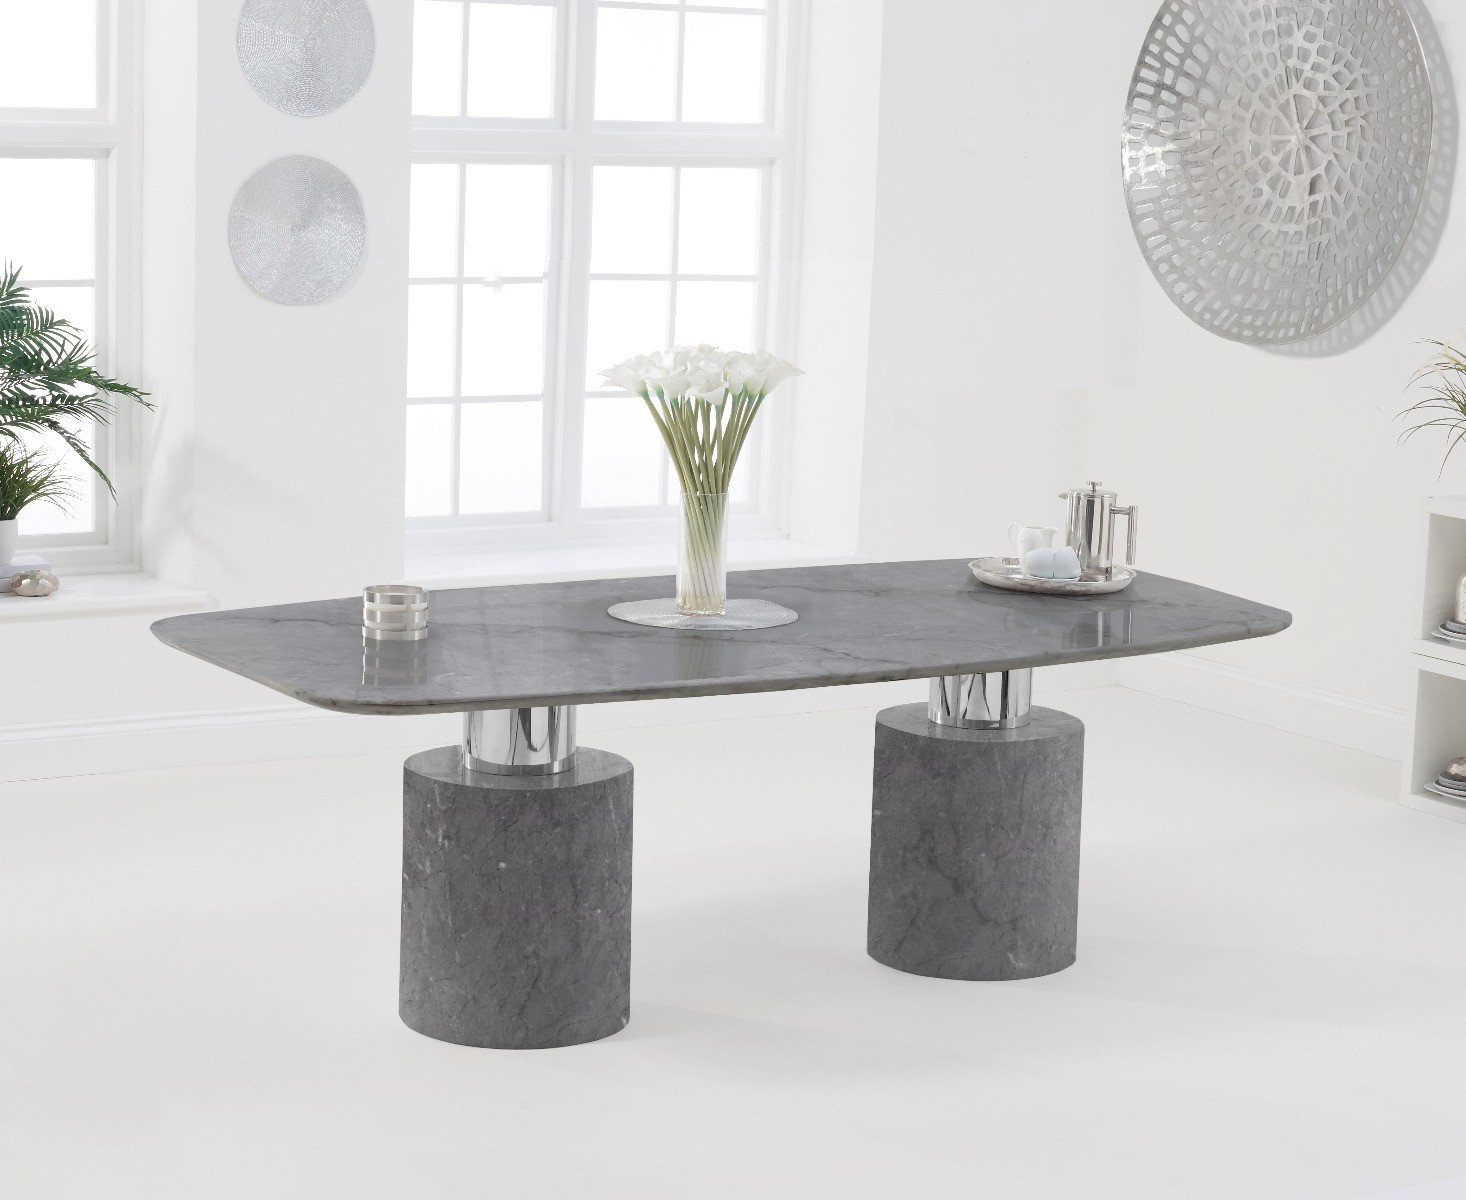 Photo 2 of Antonio 220cm grey marble dining table with 8 grey lorenzo chairs